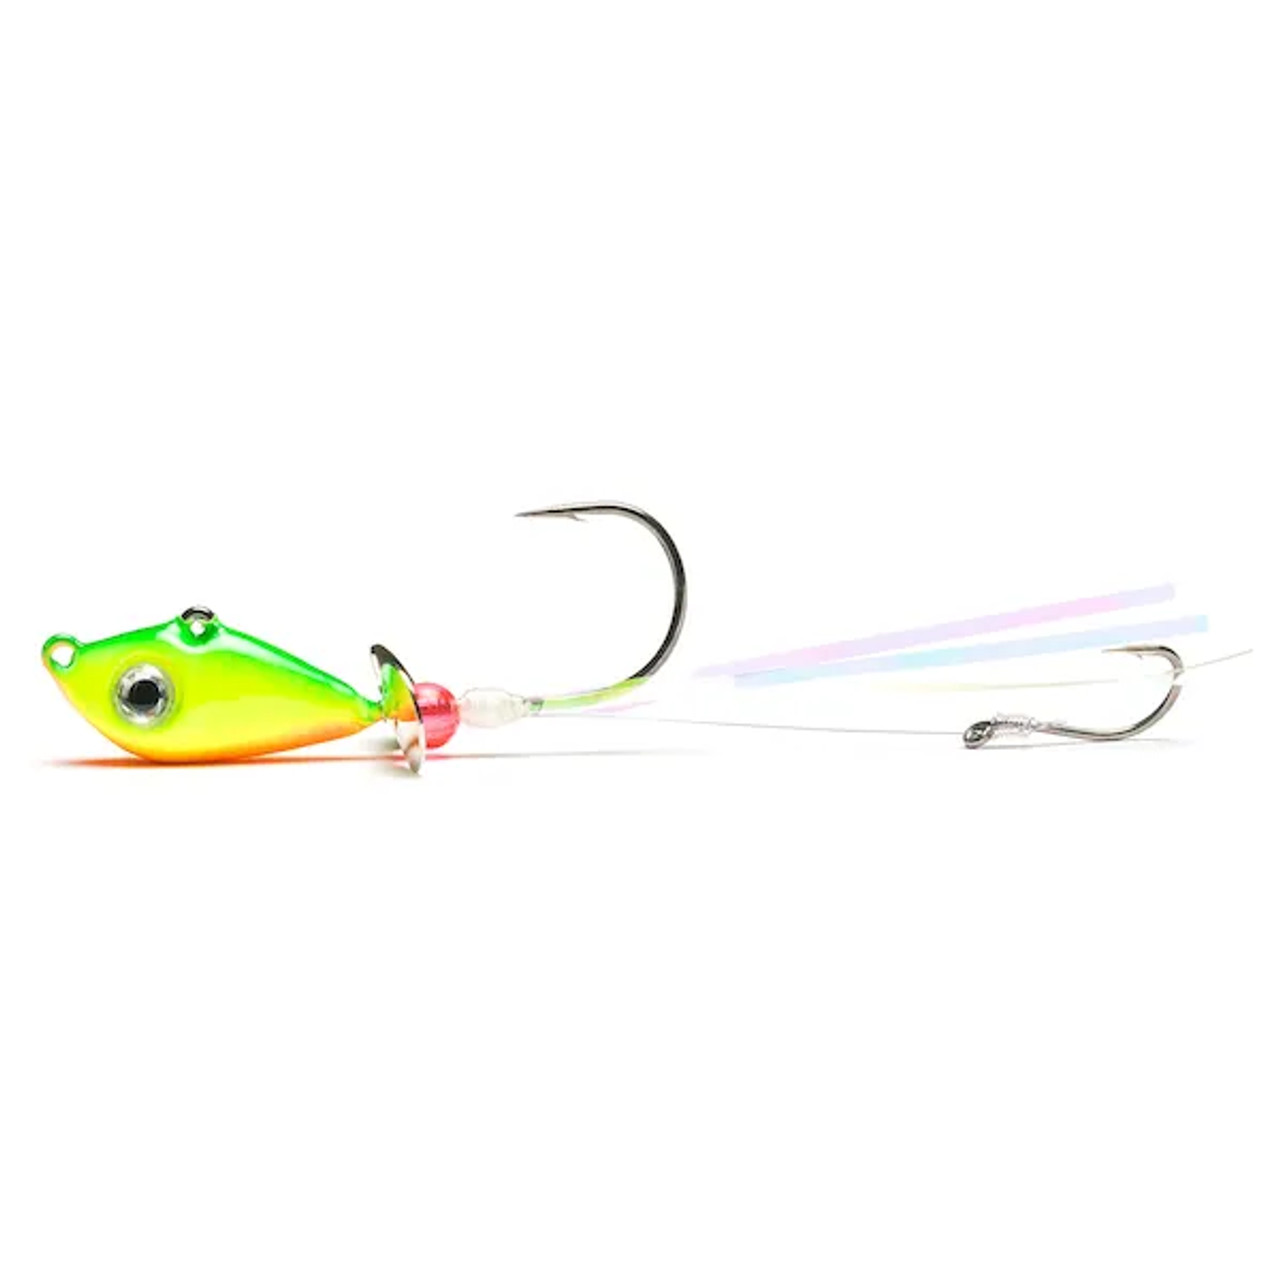 Mustad Walleye Death Spinner Lure, Pink and White, 1/4oz